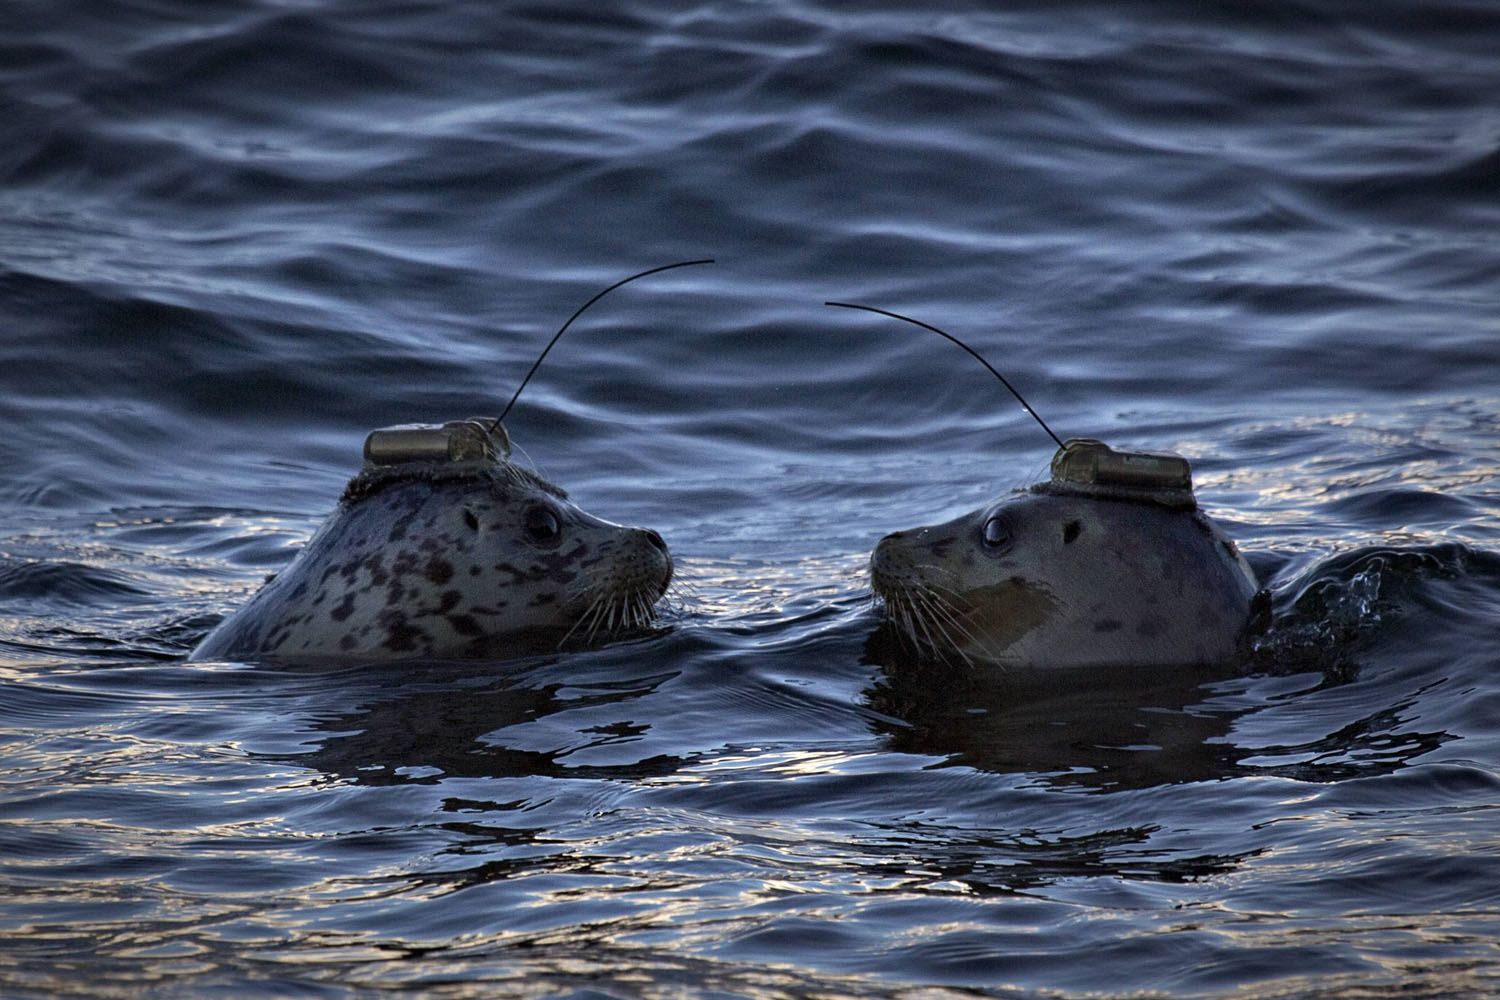 Nov. 20, 2013. A pair of harbour seals wearing satellite linked transmitters on their heads face each after being released into the waters of Howe Sound in Porteau Cove, British Columbia.